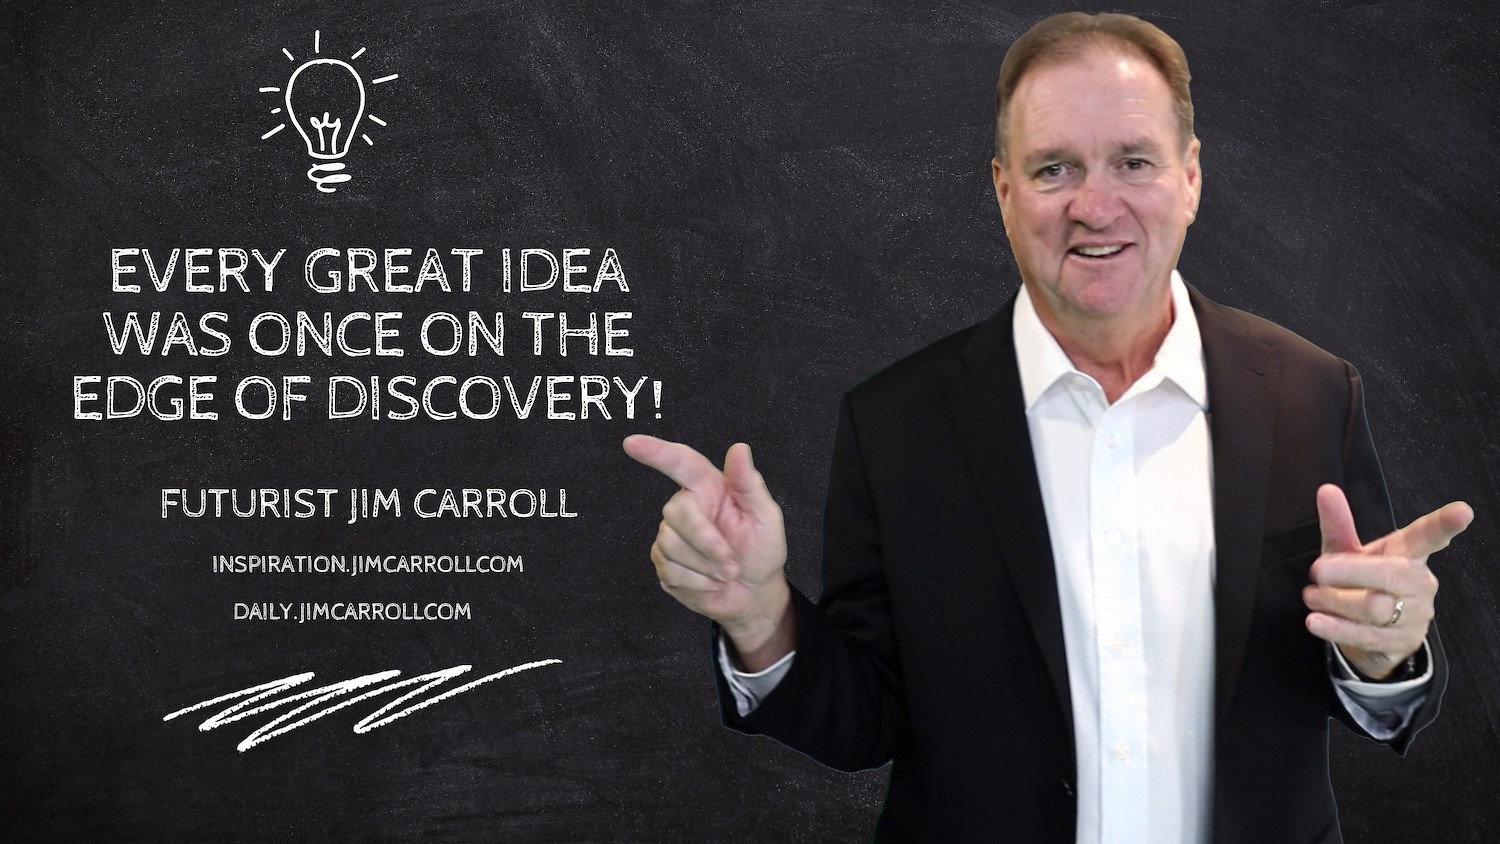 "Every great idea was once on the edge of discovery!" - Futurist Jim Carroll